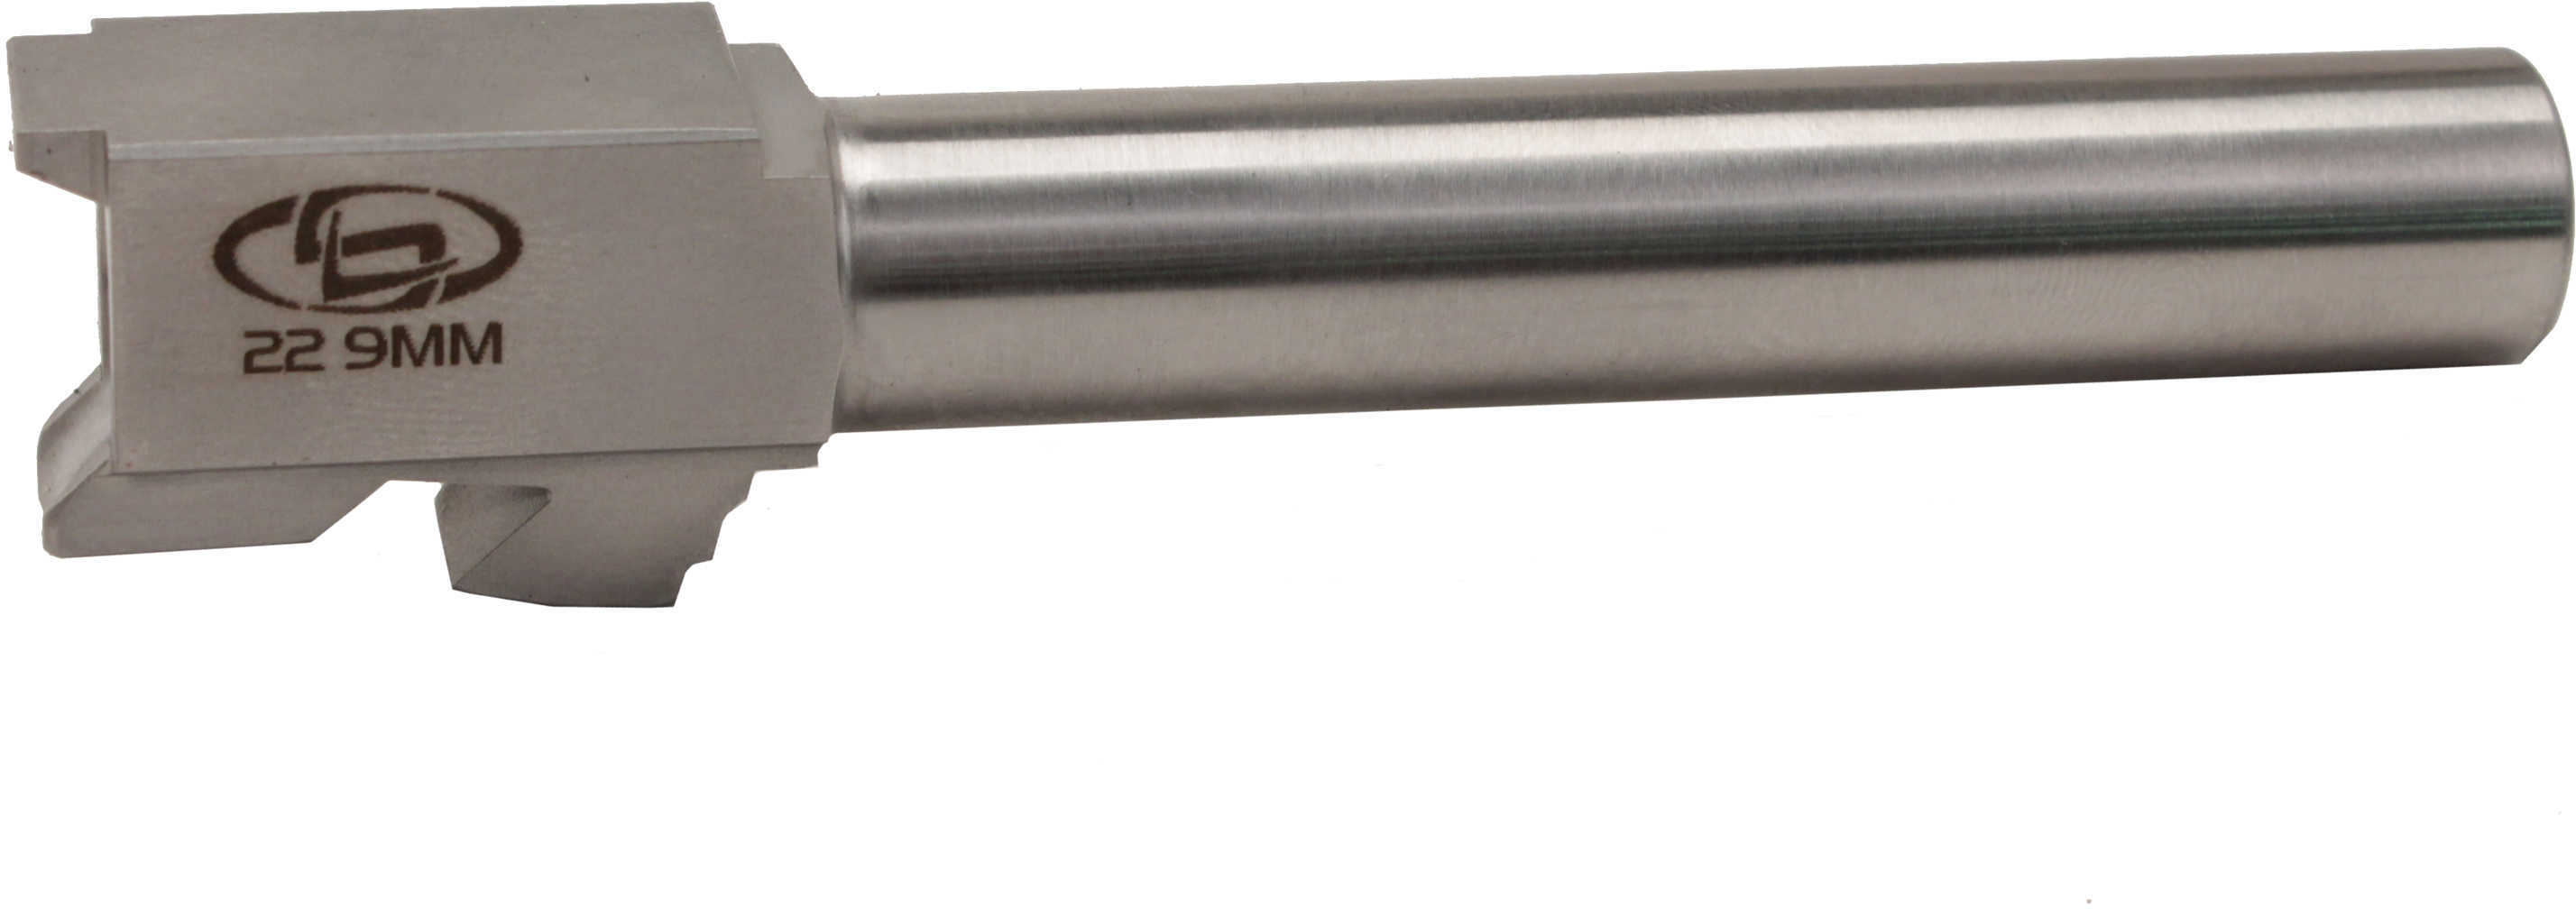 Storm Lake Barrel for Glock 22 40 S&W To 9MM Conversion 4.49"